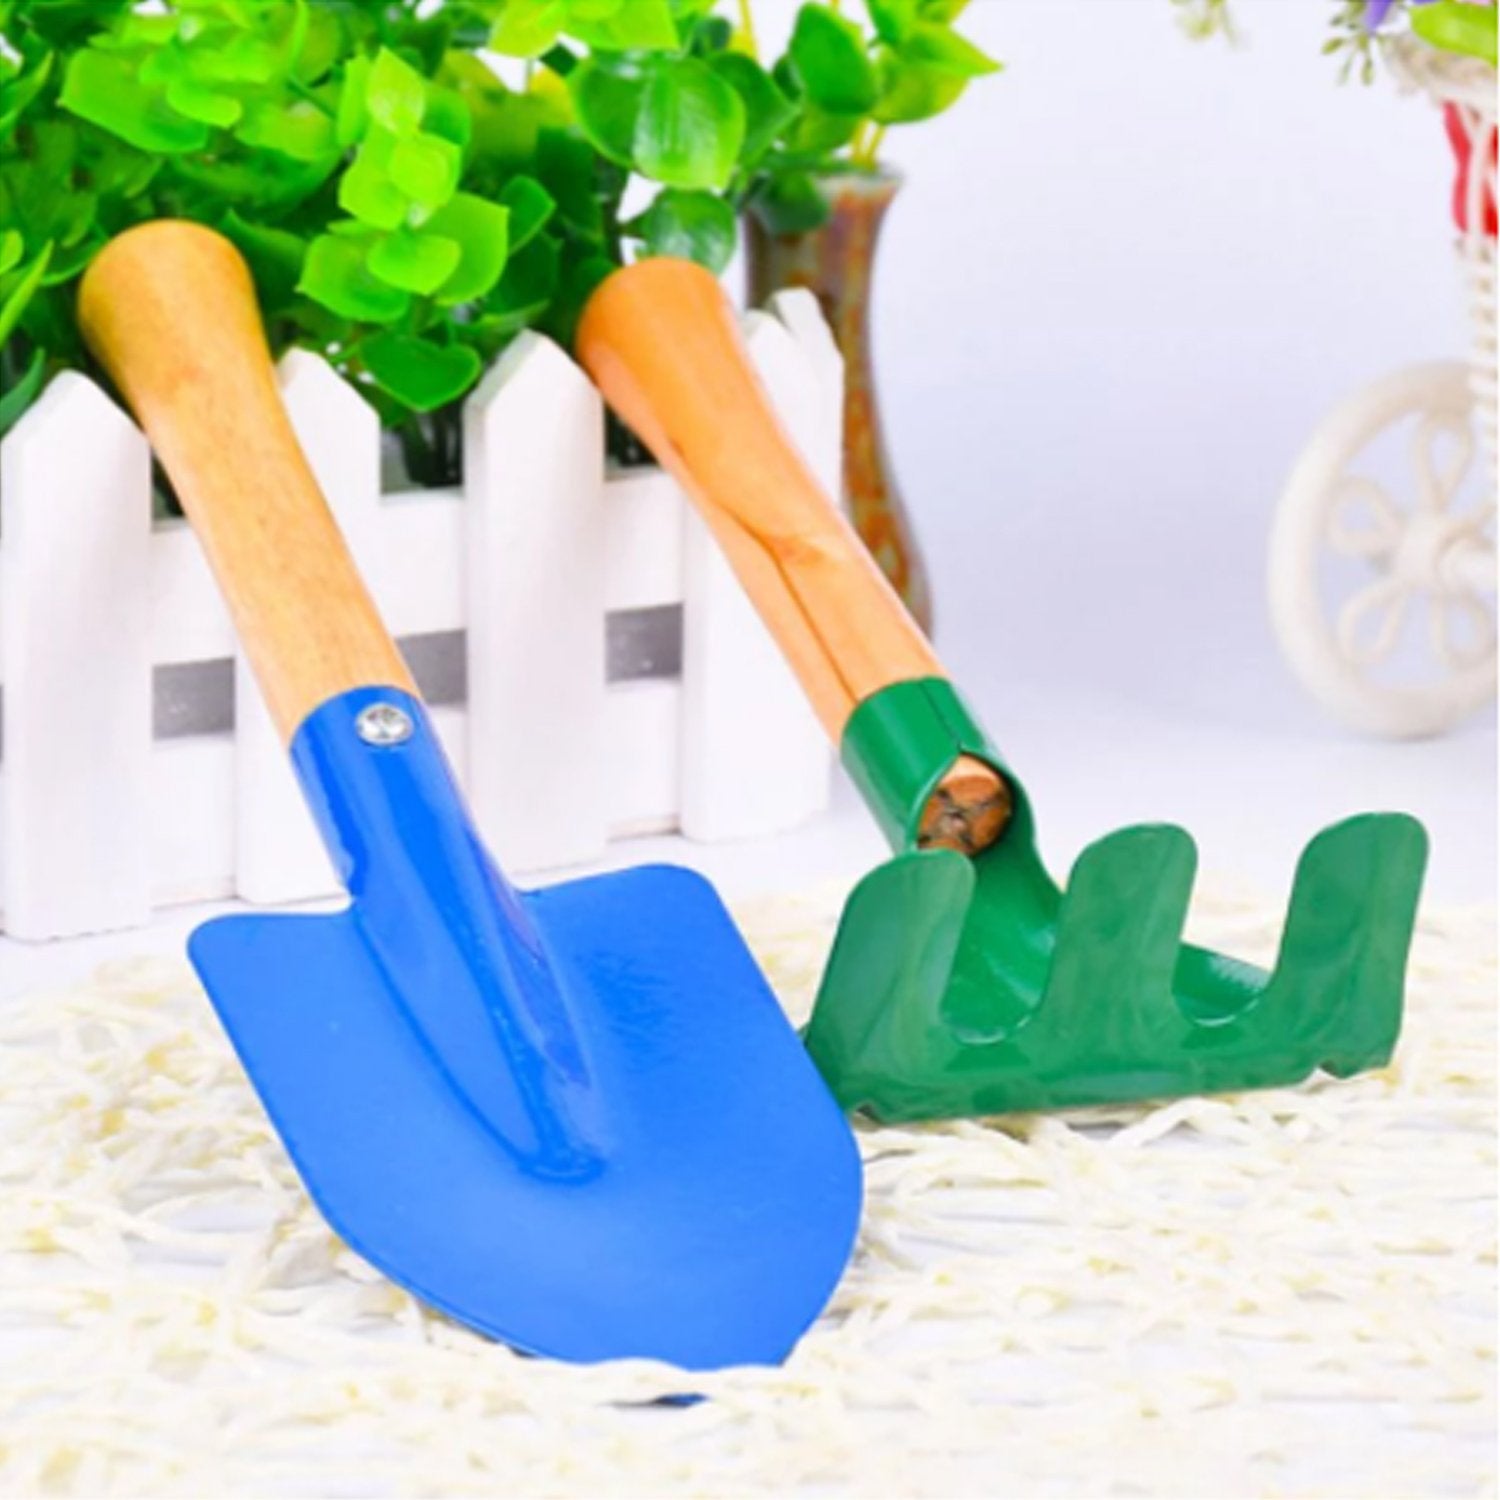 7409 Gardening Tools kit Hand Cultivator, Small Trowel, Garden Fork - 3pcs (Multicolor) - SkyShopy